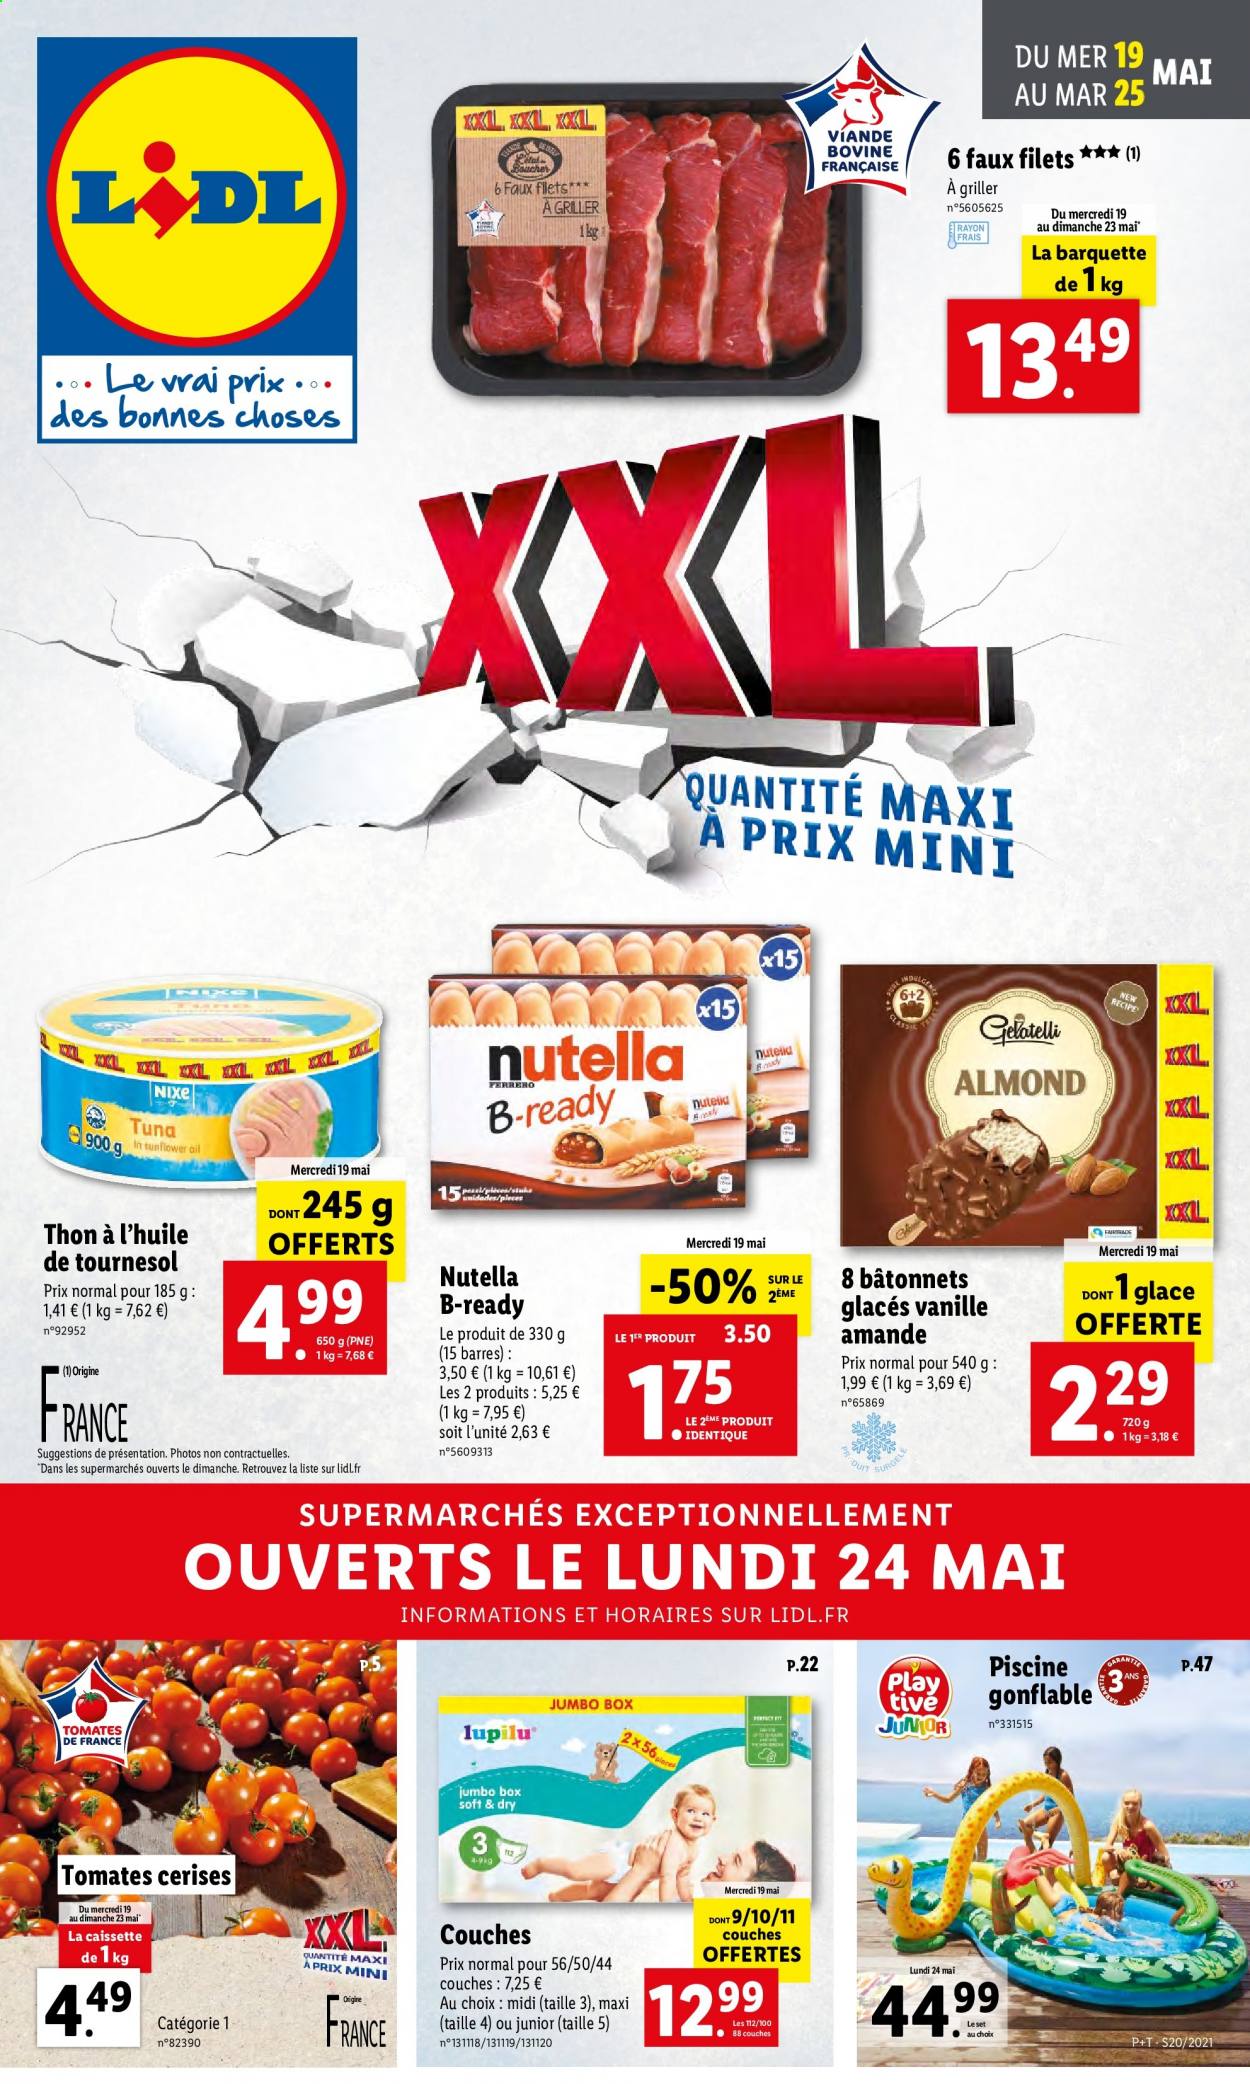 Catalogue Lidl - 19.05.2021 - 25.05.2021. Page 1.